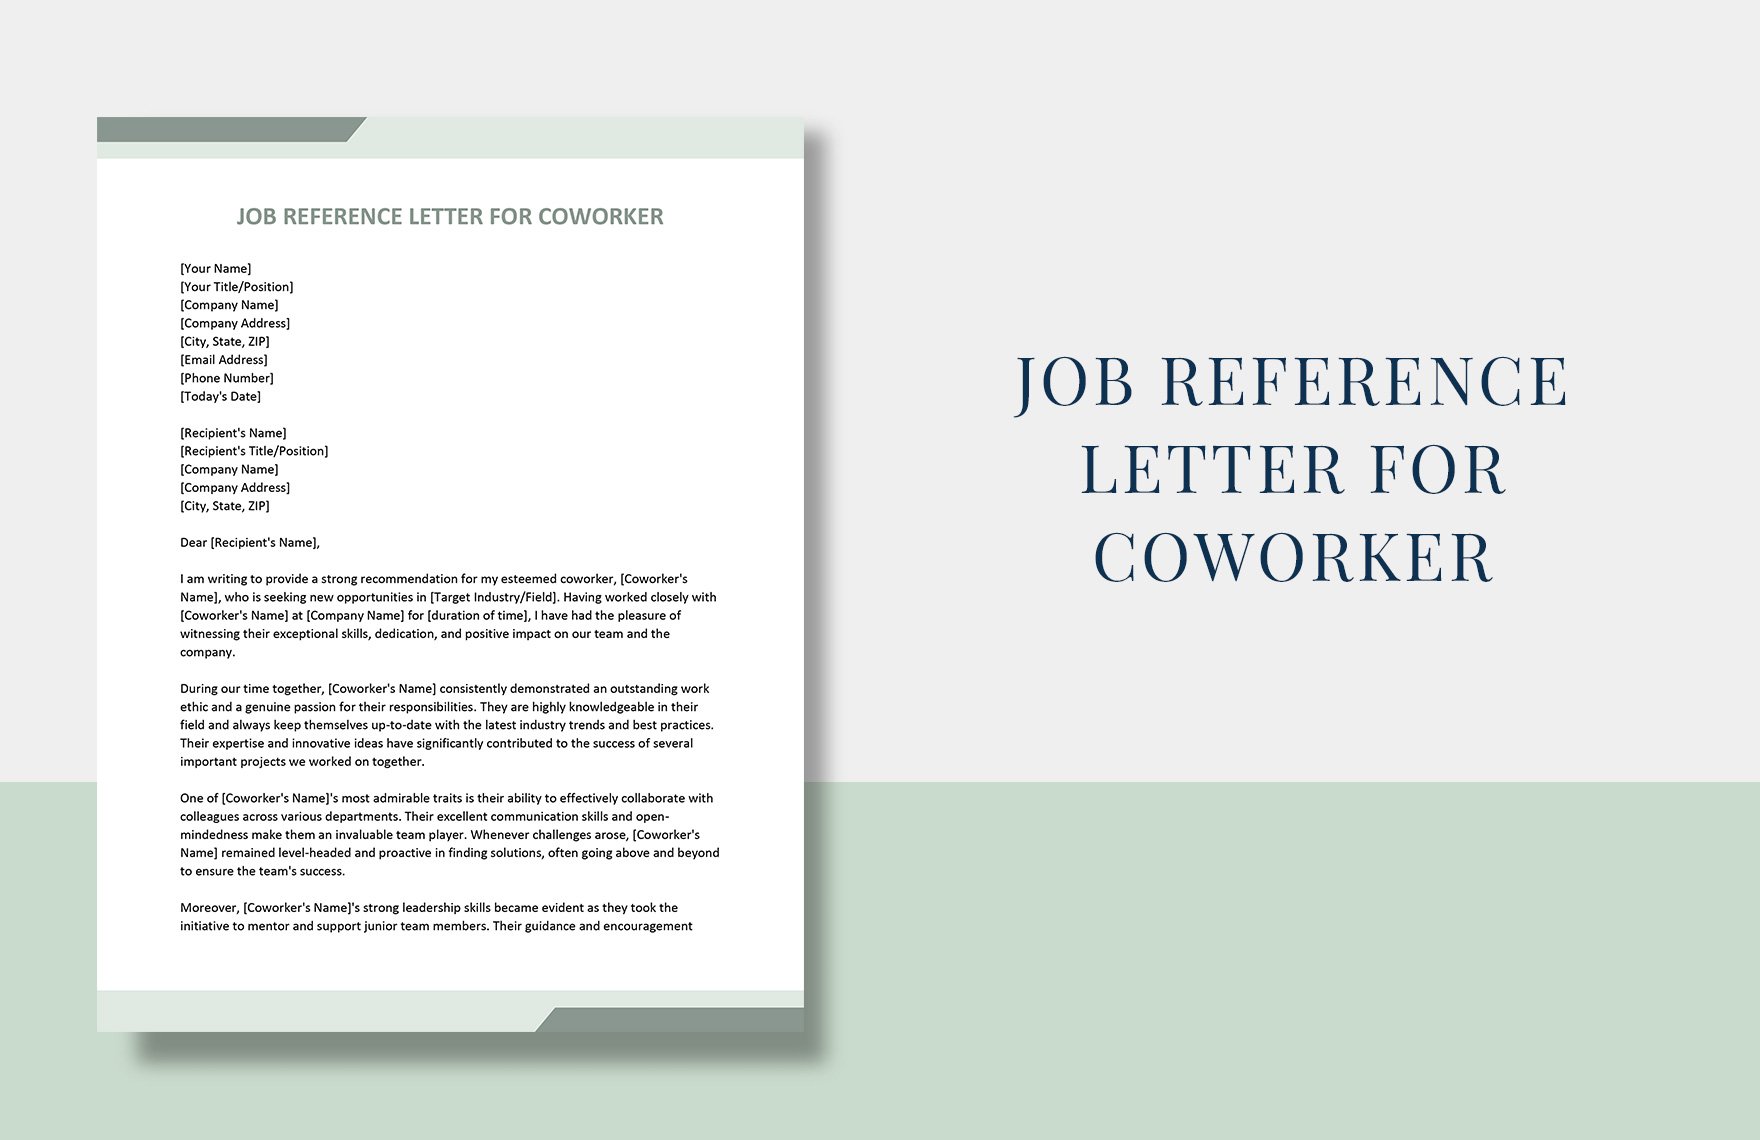 Job Reference Letter for Coworker